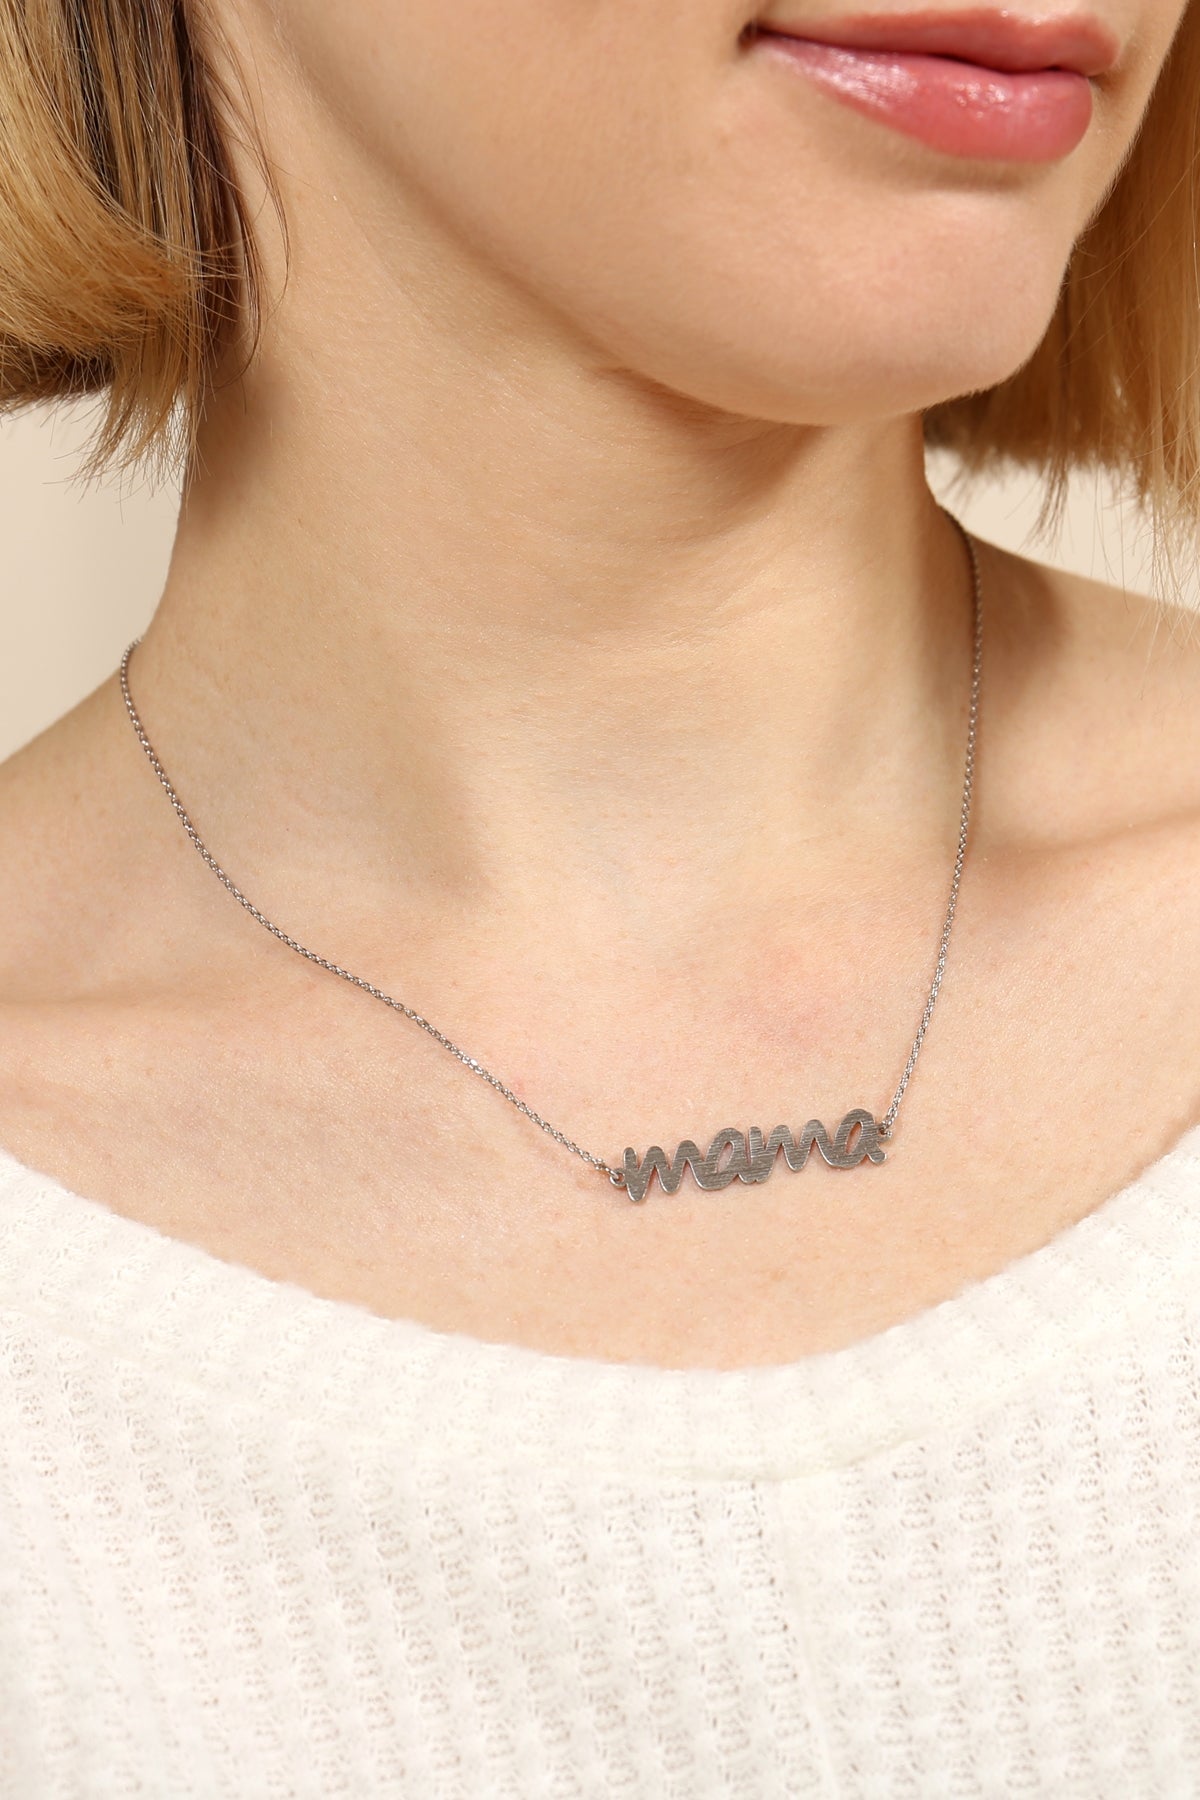 "MAMA" LETTERING NECKLACE